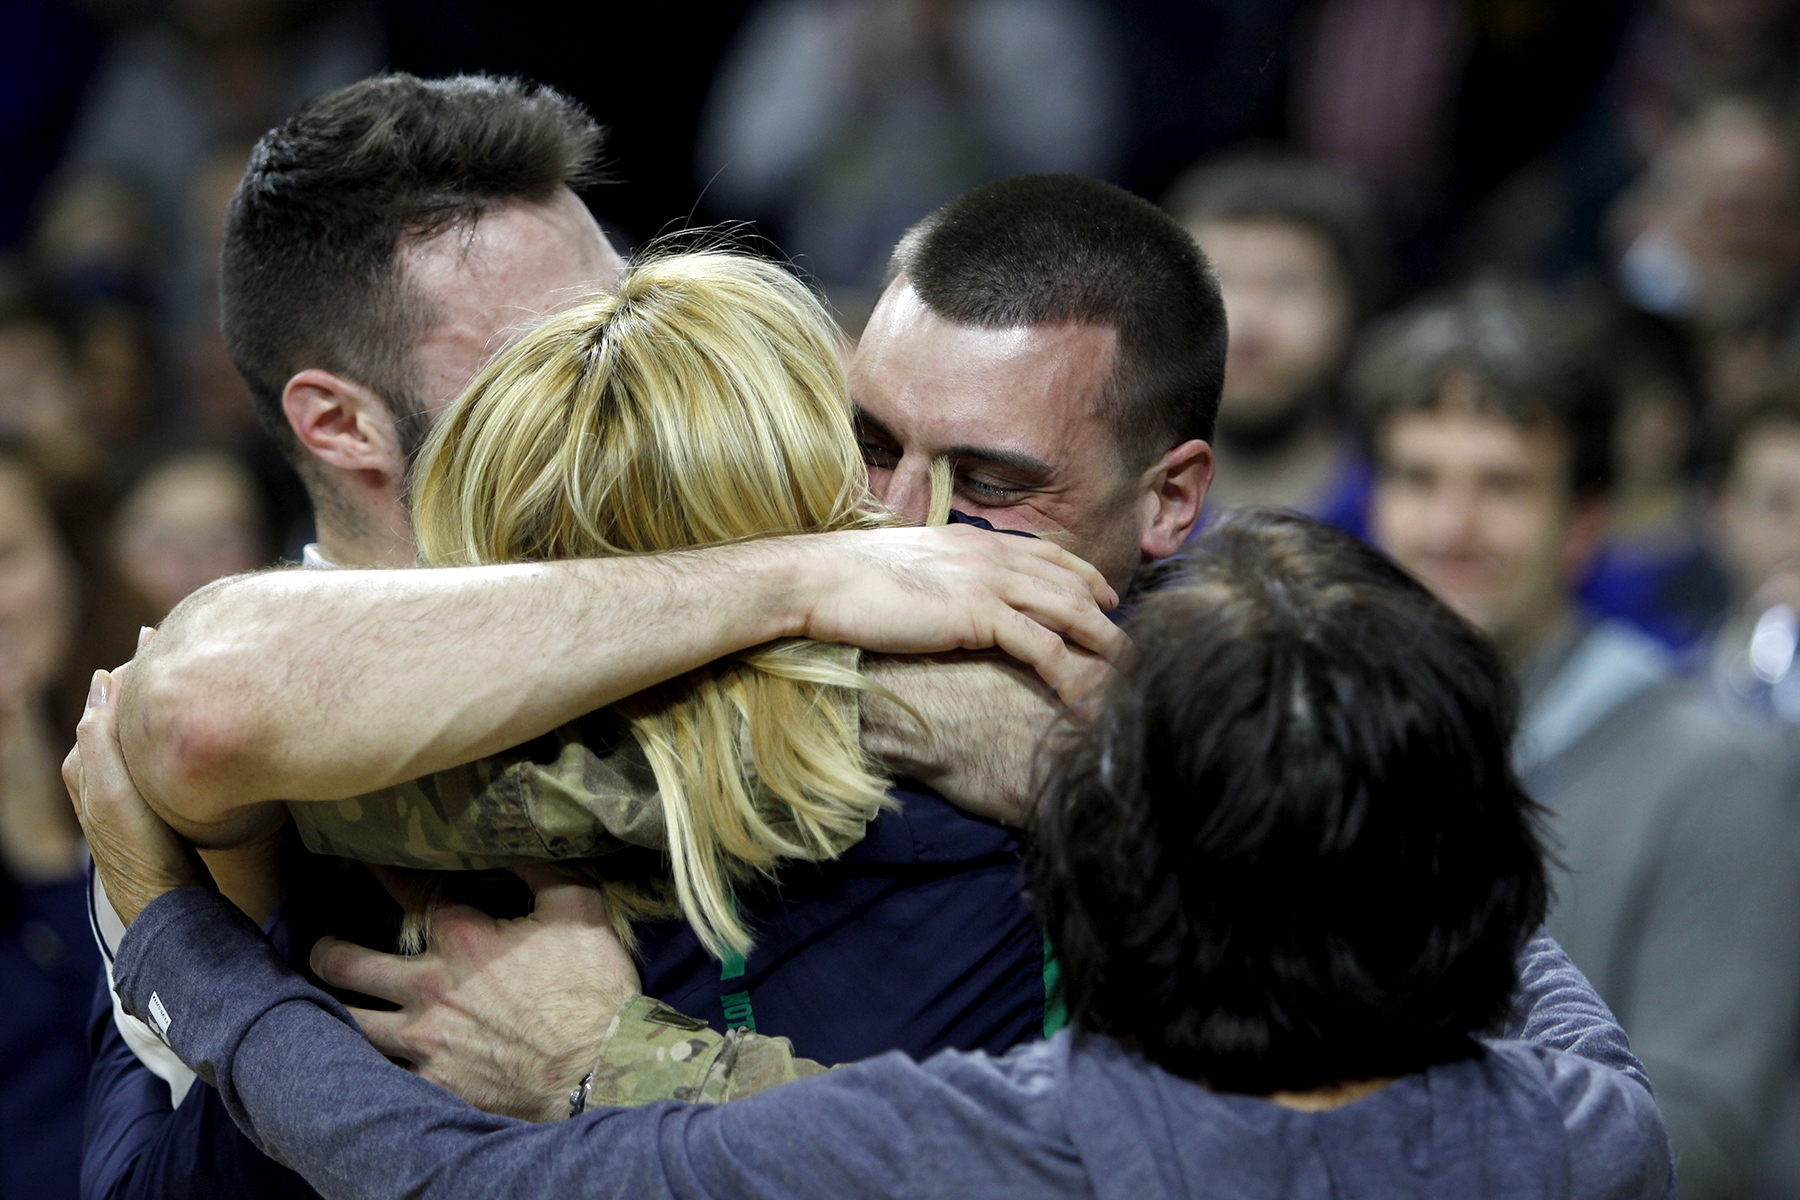 PHOTO: Matt Farrell, Notre Dame's junior guard, was surprised at a game by his brother, Bo, who returned from having been deployed in Afghanistan, December 19, 2016.  